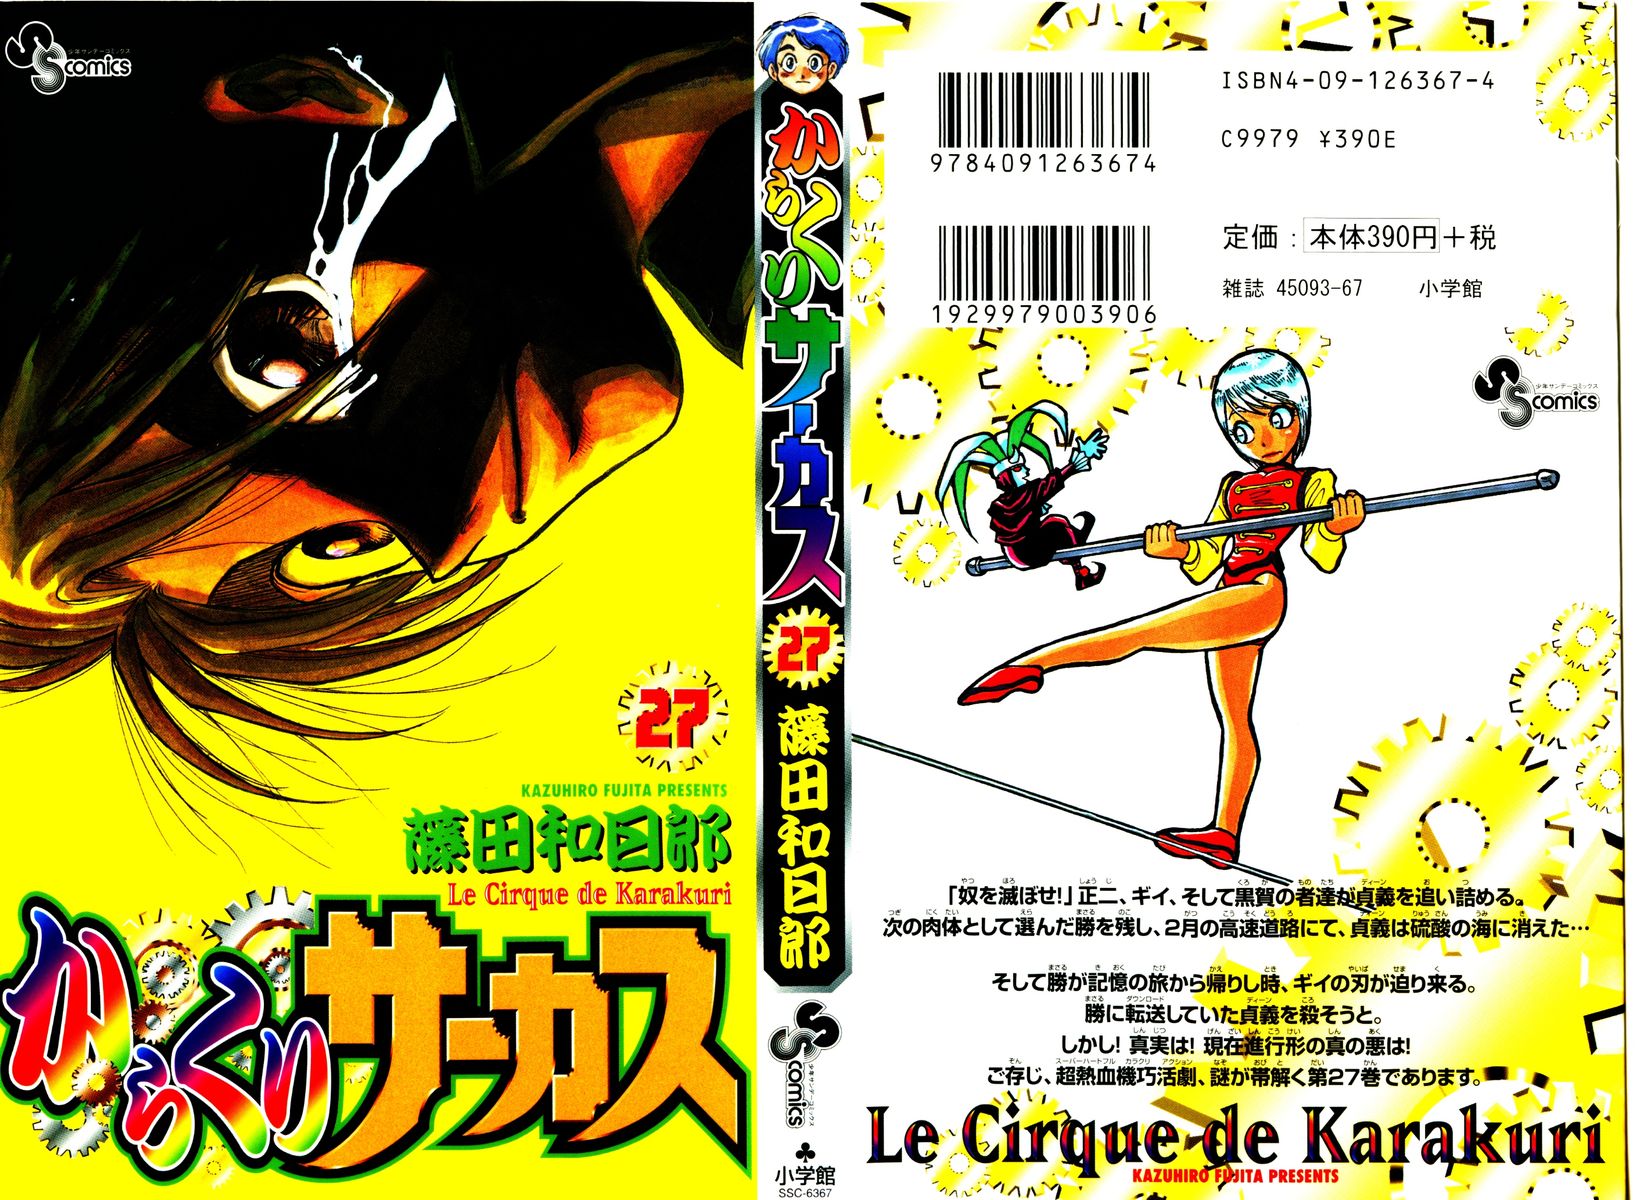 Karakuri Circus Chapter 257: Circus - Final Act - Act 45: Between Three Years Ago And Now - Picture 2